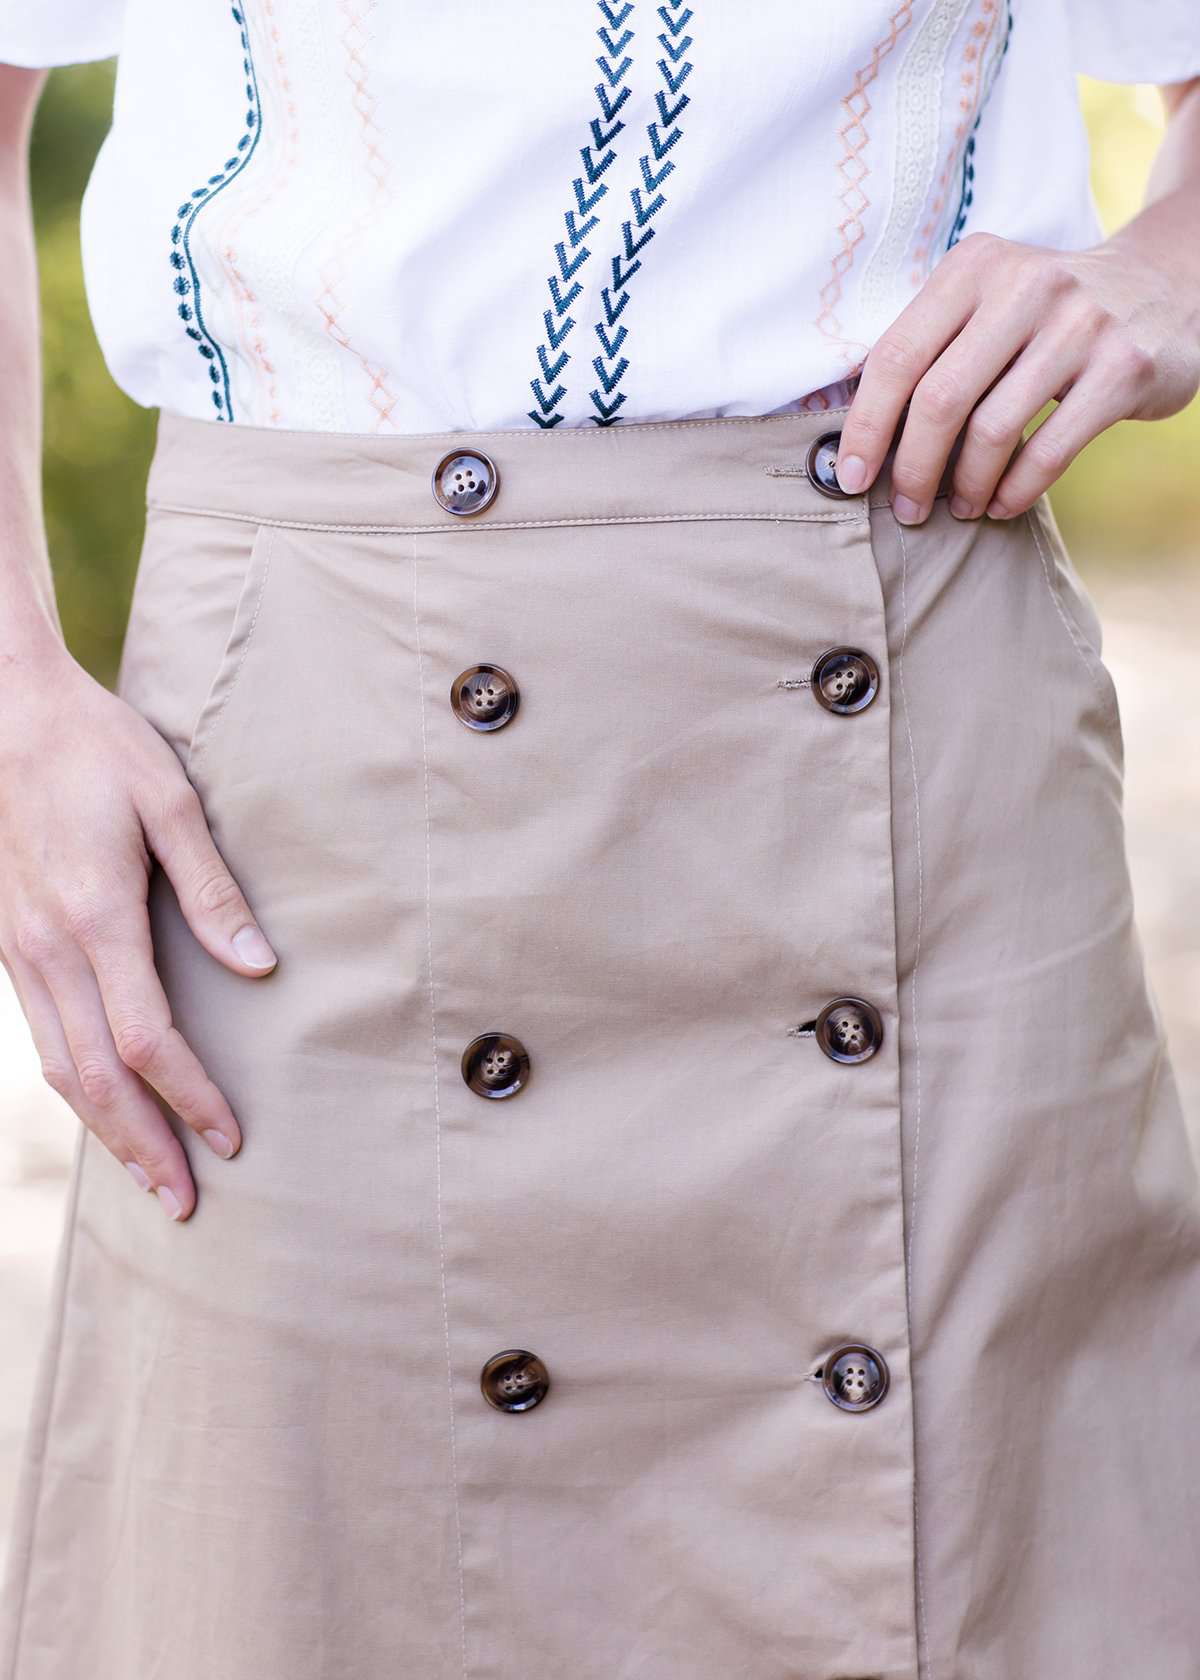 Taupe midi length skirt with double buttons down the front.